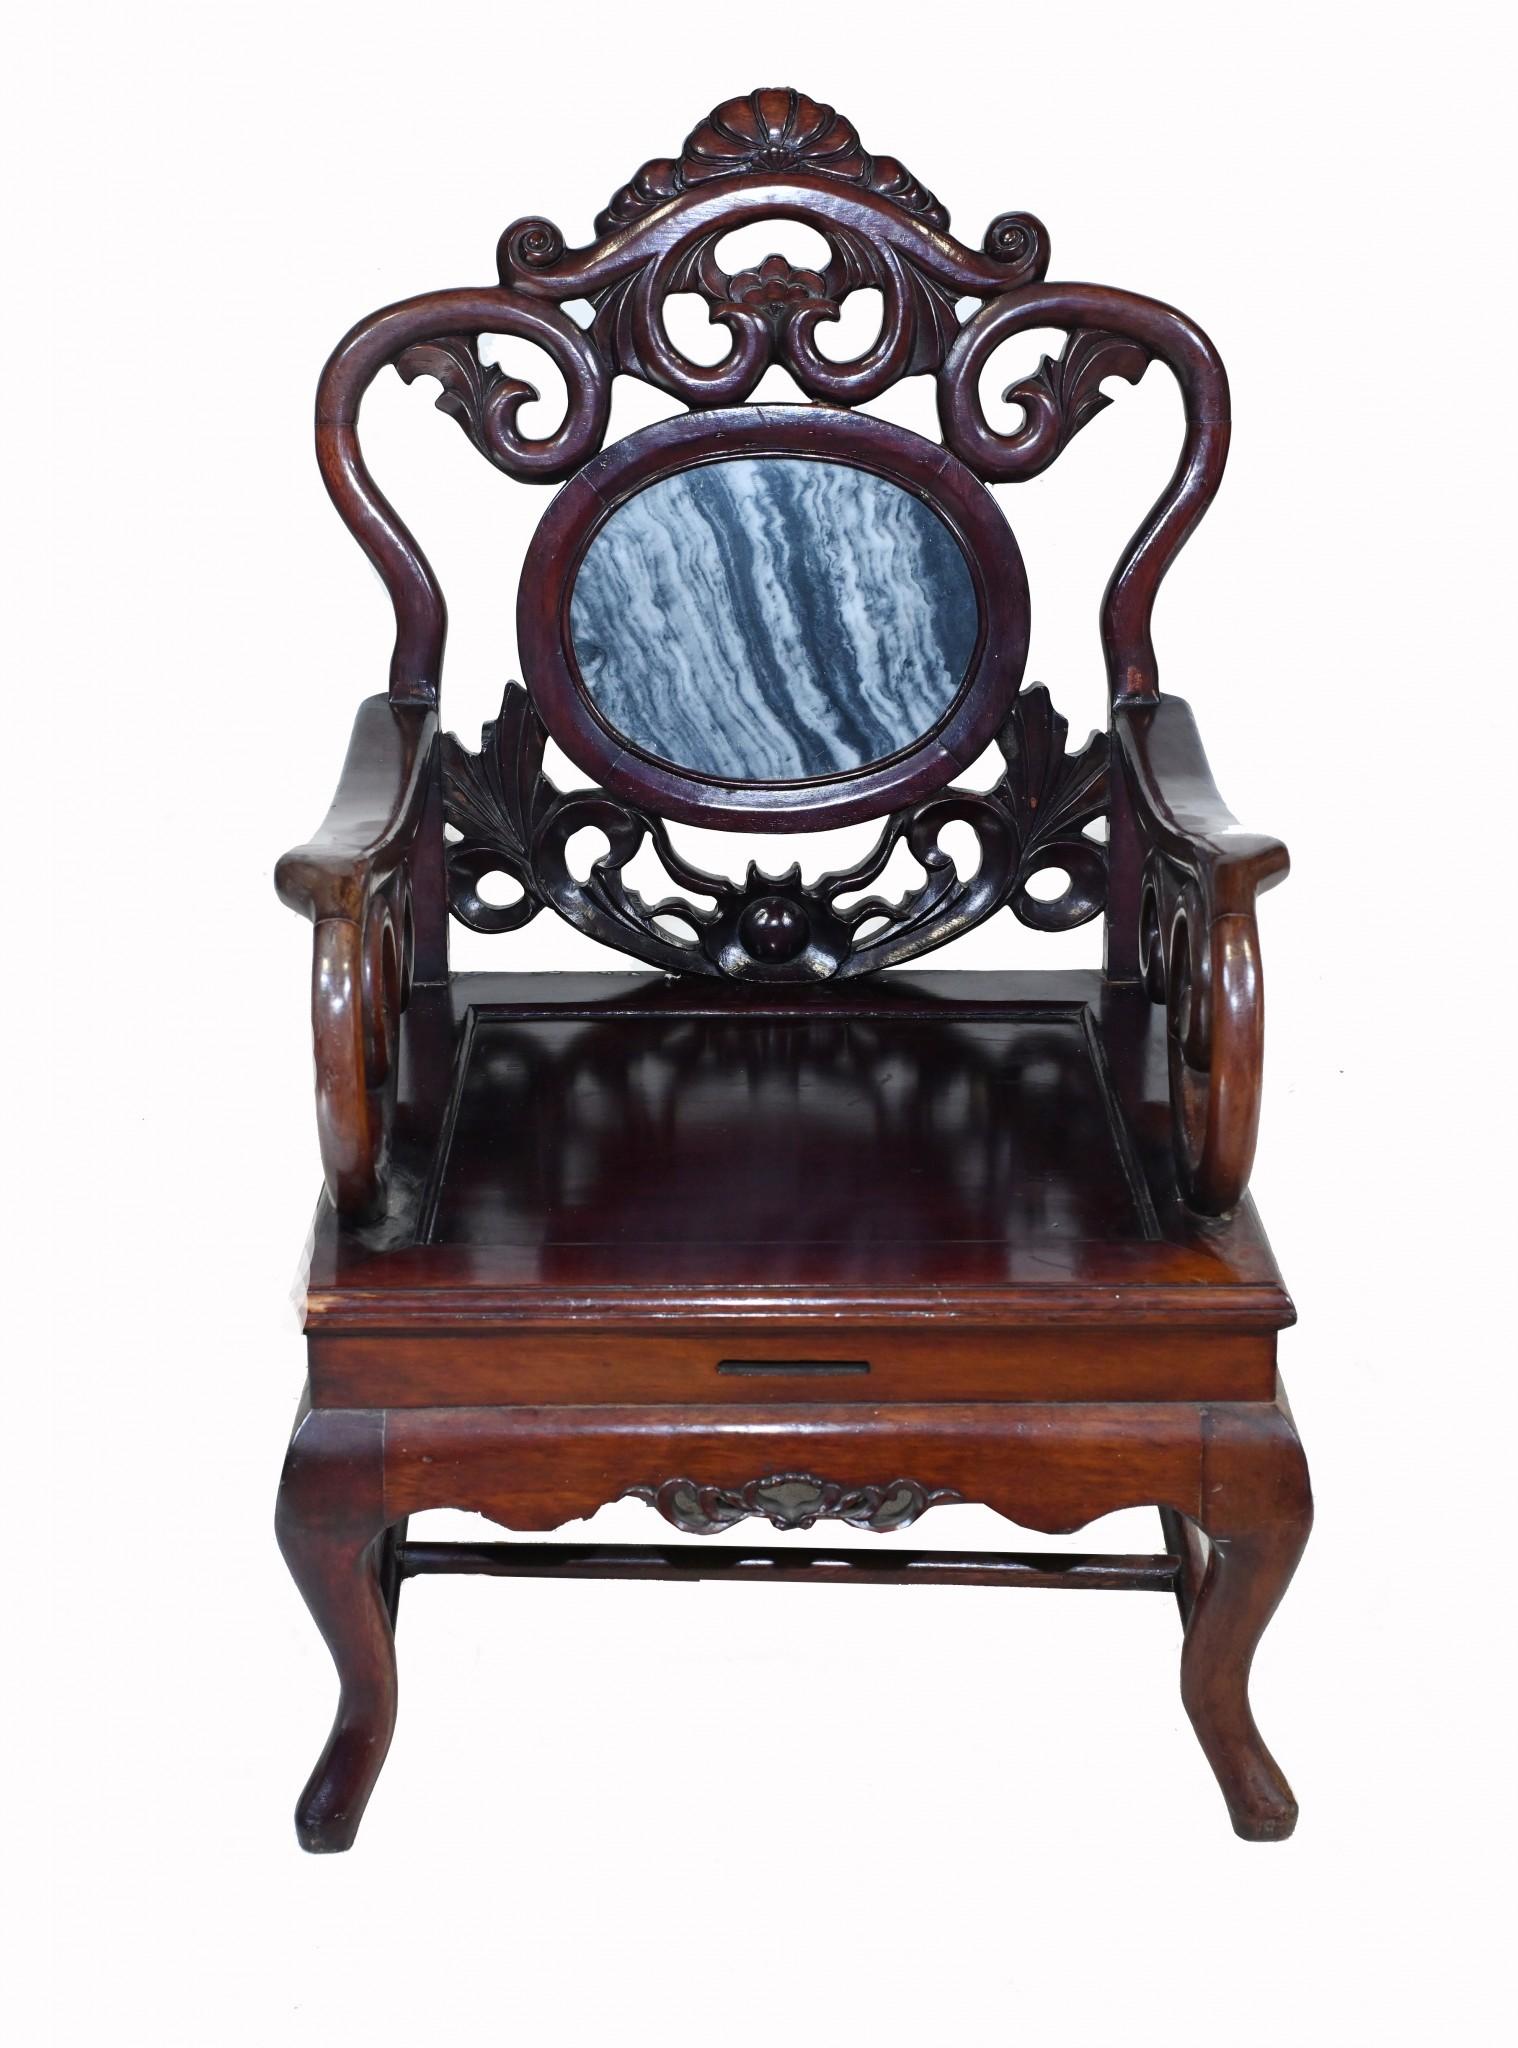 Gorgeous single Chinese arm chair in hard wood
Great interiors piece, perfect for that Asian inspired room mixed in with other pieces
Love the hand carved backrests with almost art nouveau look and a marble plaque
Viewings available by